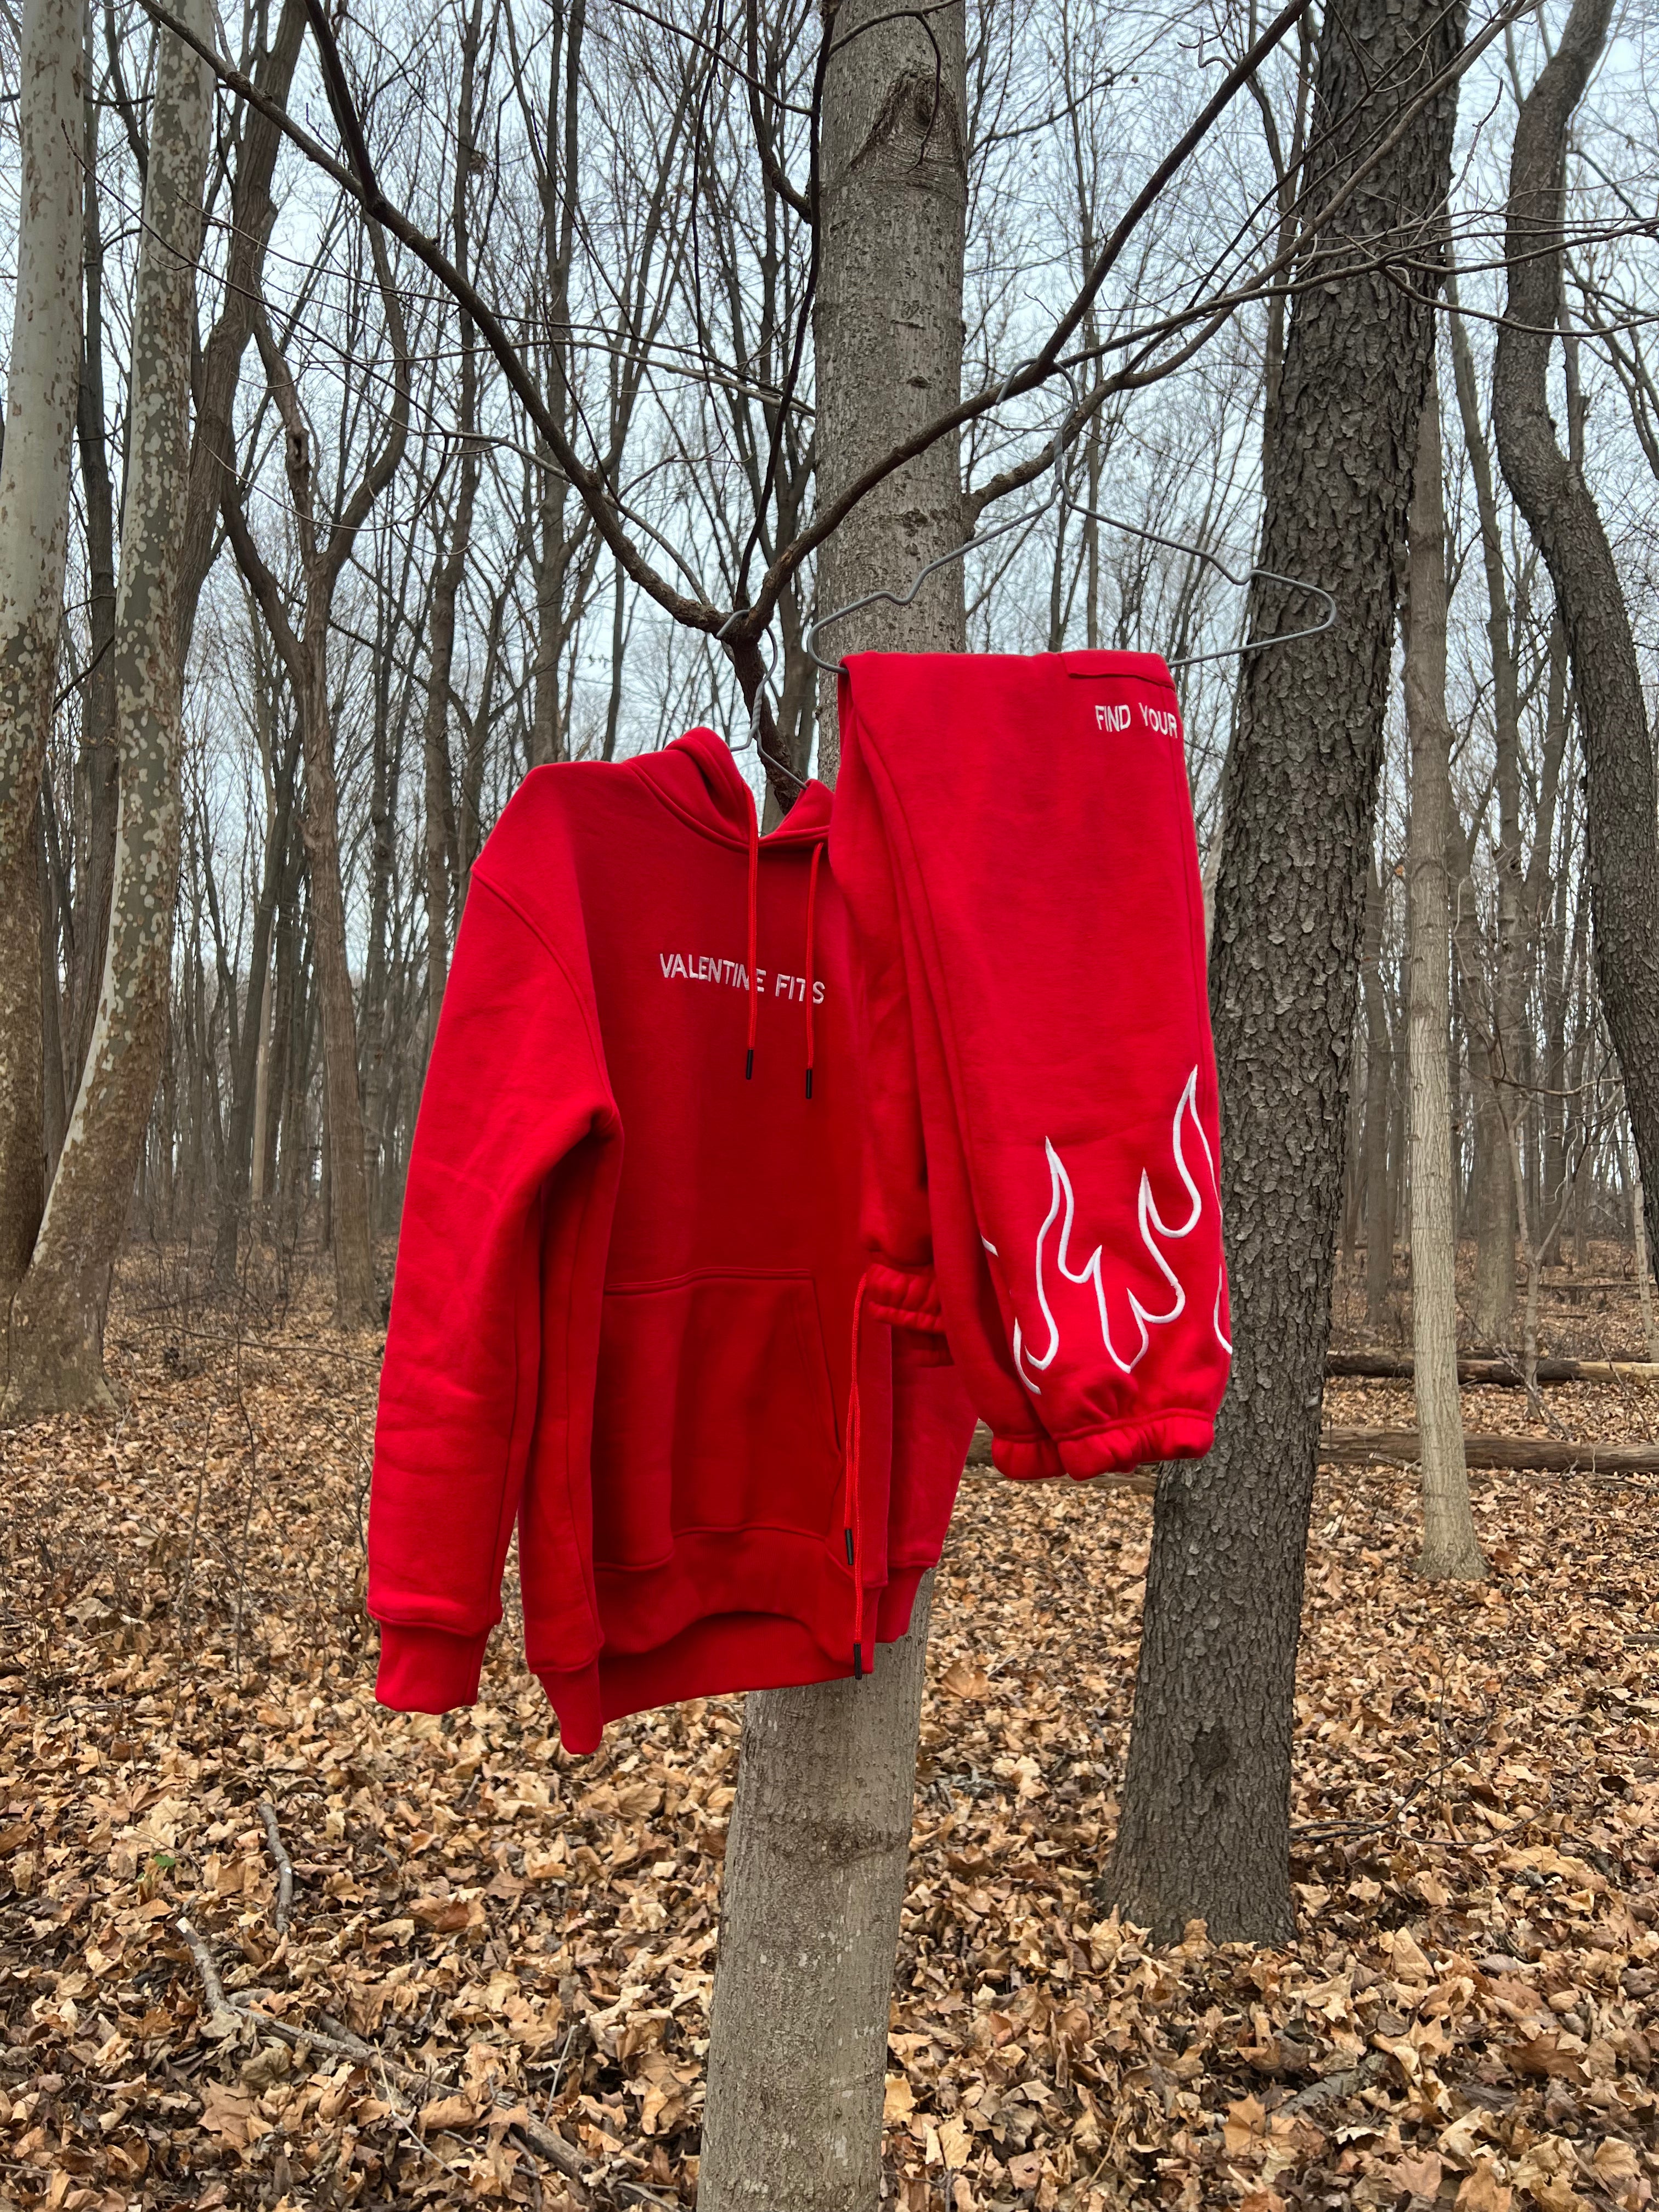 Forest Fire Embroidered Sweater